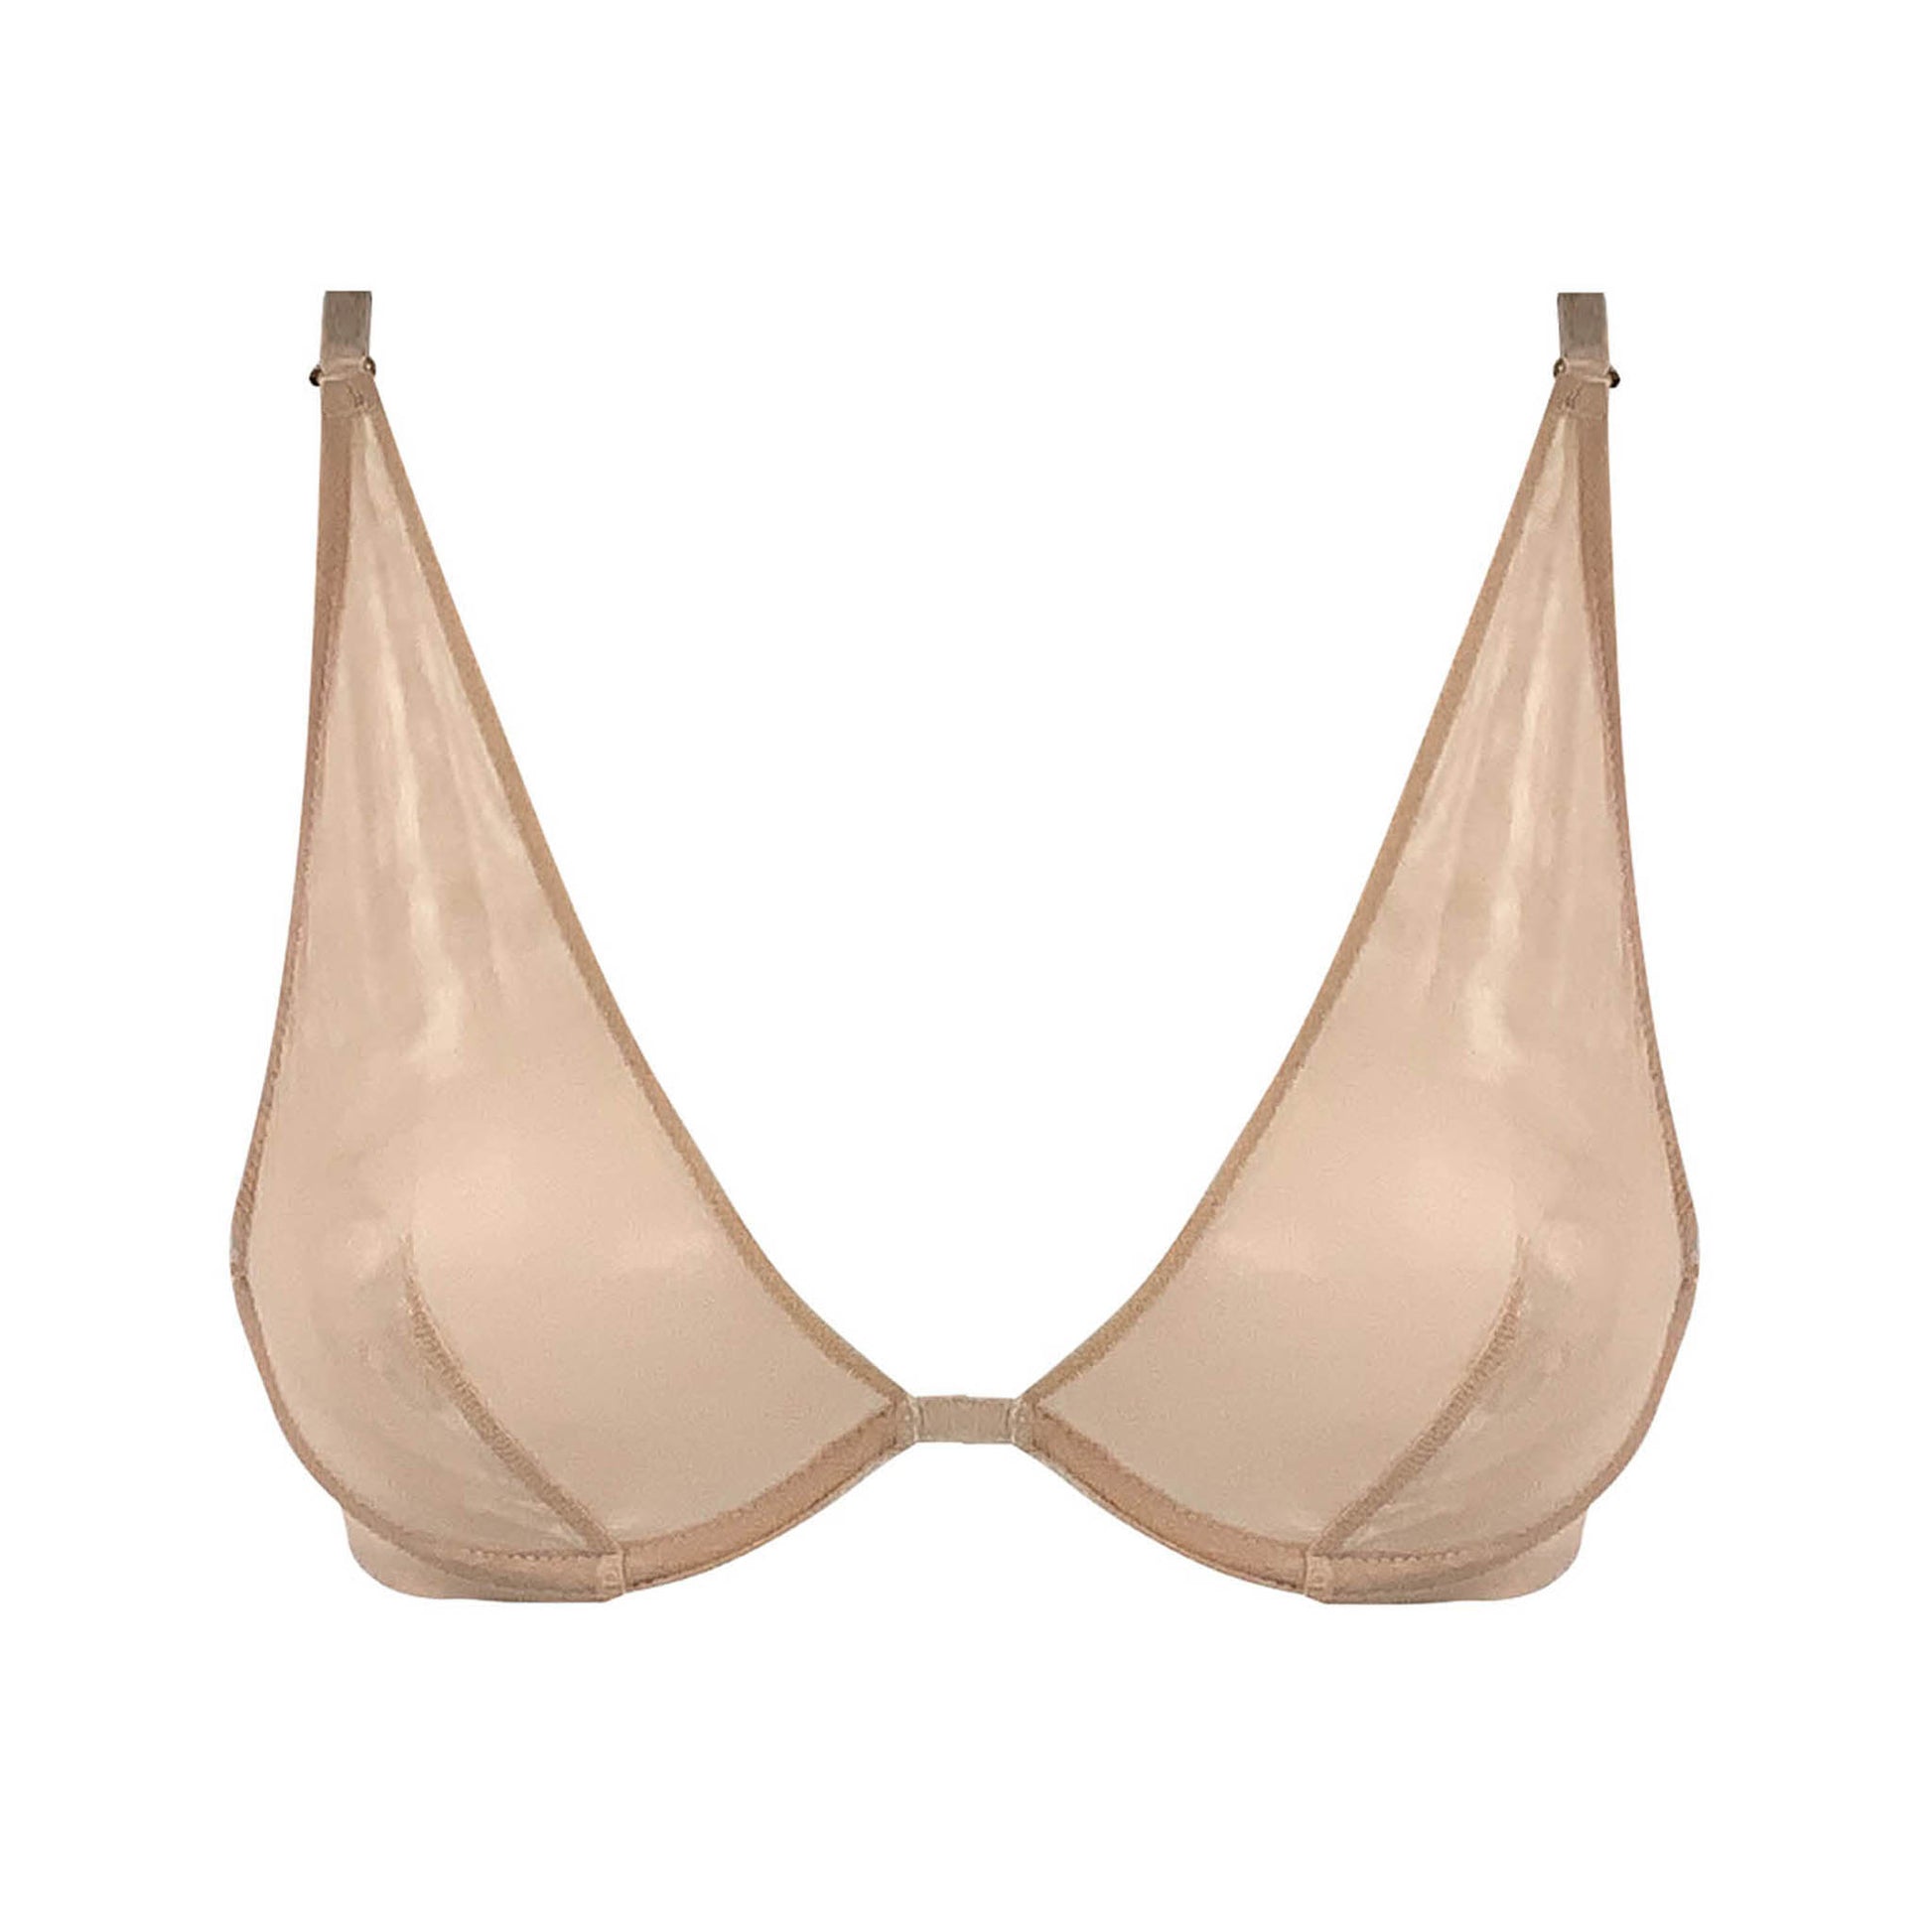 The super comfortable iconic deep plunge bra is designed from soft Italian tulle.